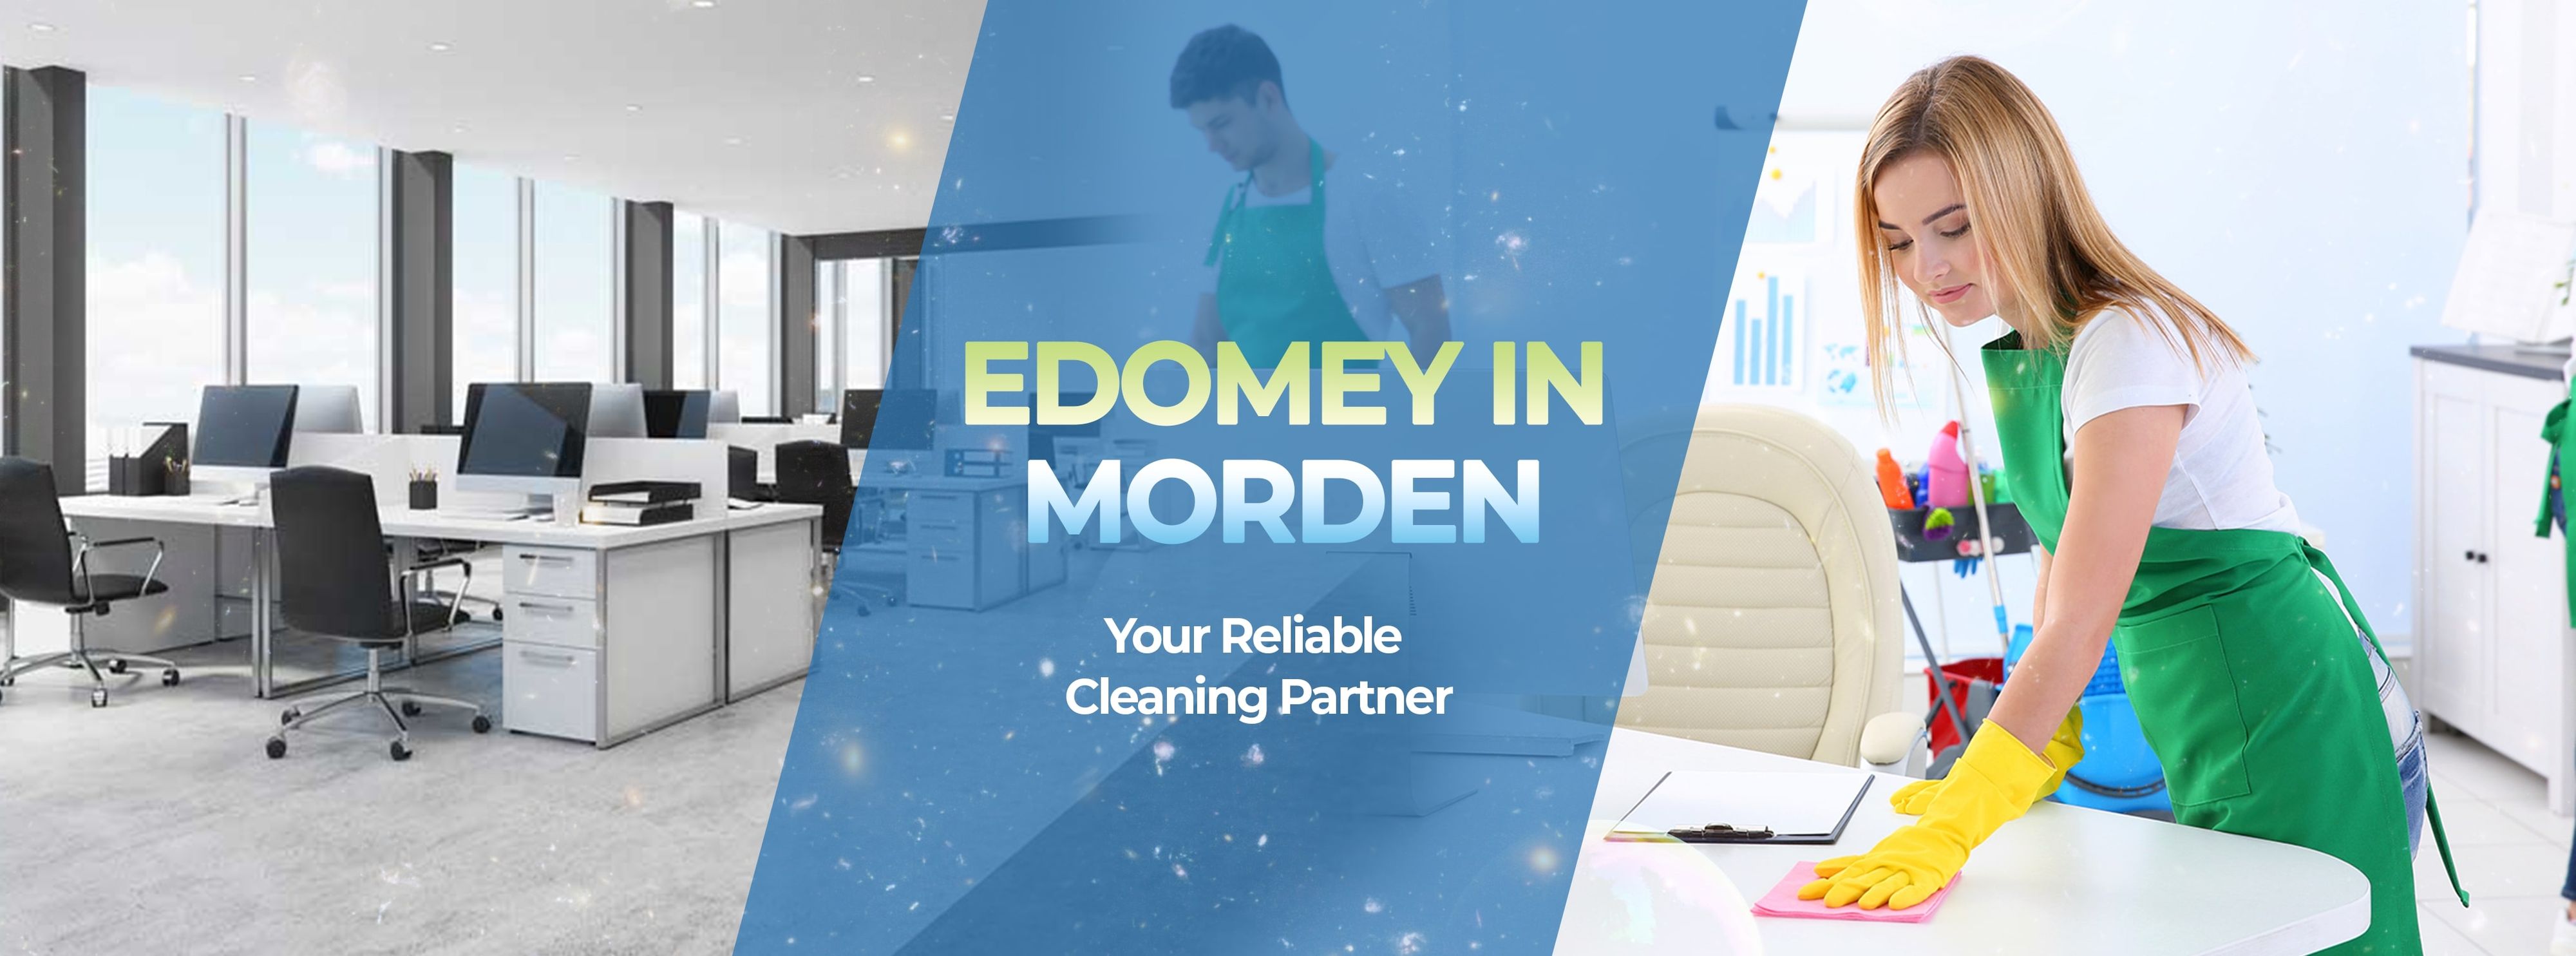 affordable Commercial Cleaning Services in Morden